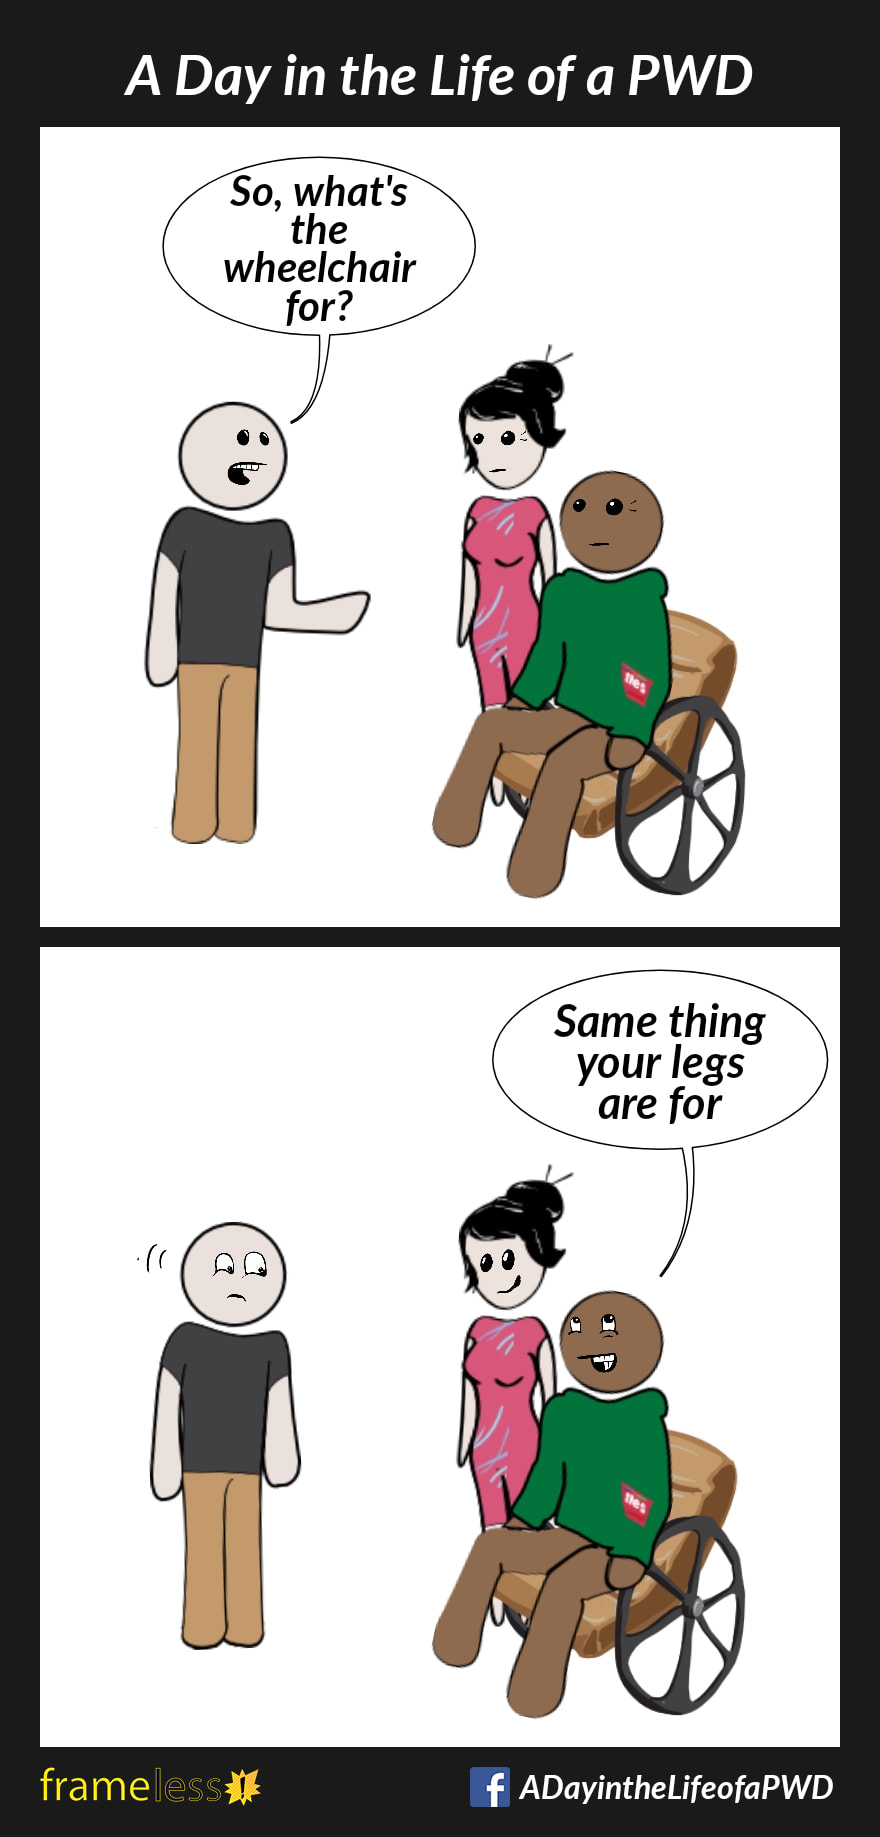 COMIC STRIP 
A Day in the Life of a PWD (Person With a Disability) 

Frame 1:
A man in a wheelchair and his friend are approached by a stranger.
STRANGER: So, what's the wheelchair for?

Frame 2:
MAN: Same thing your legs are for